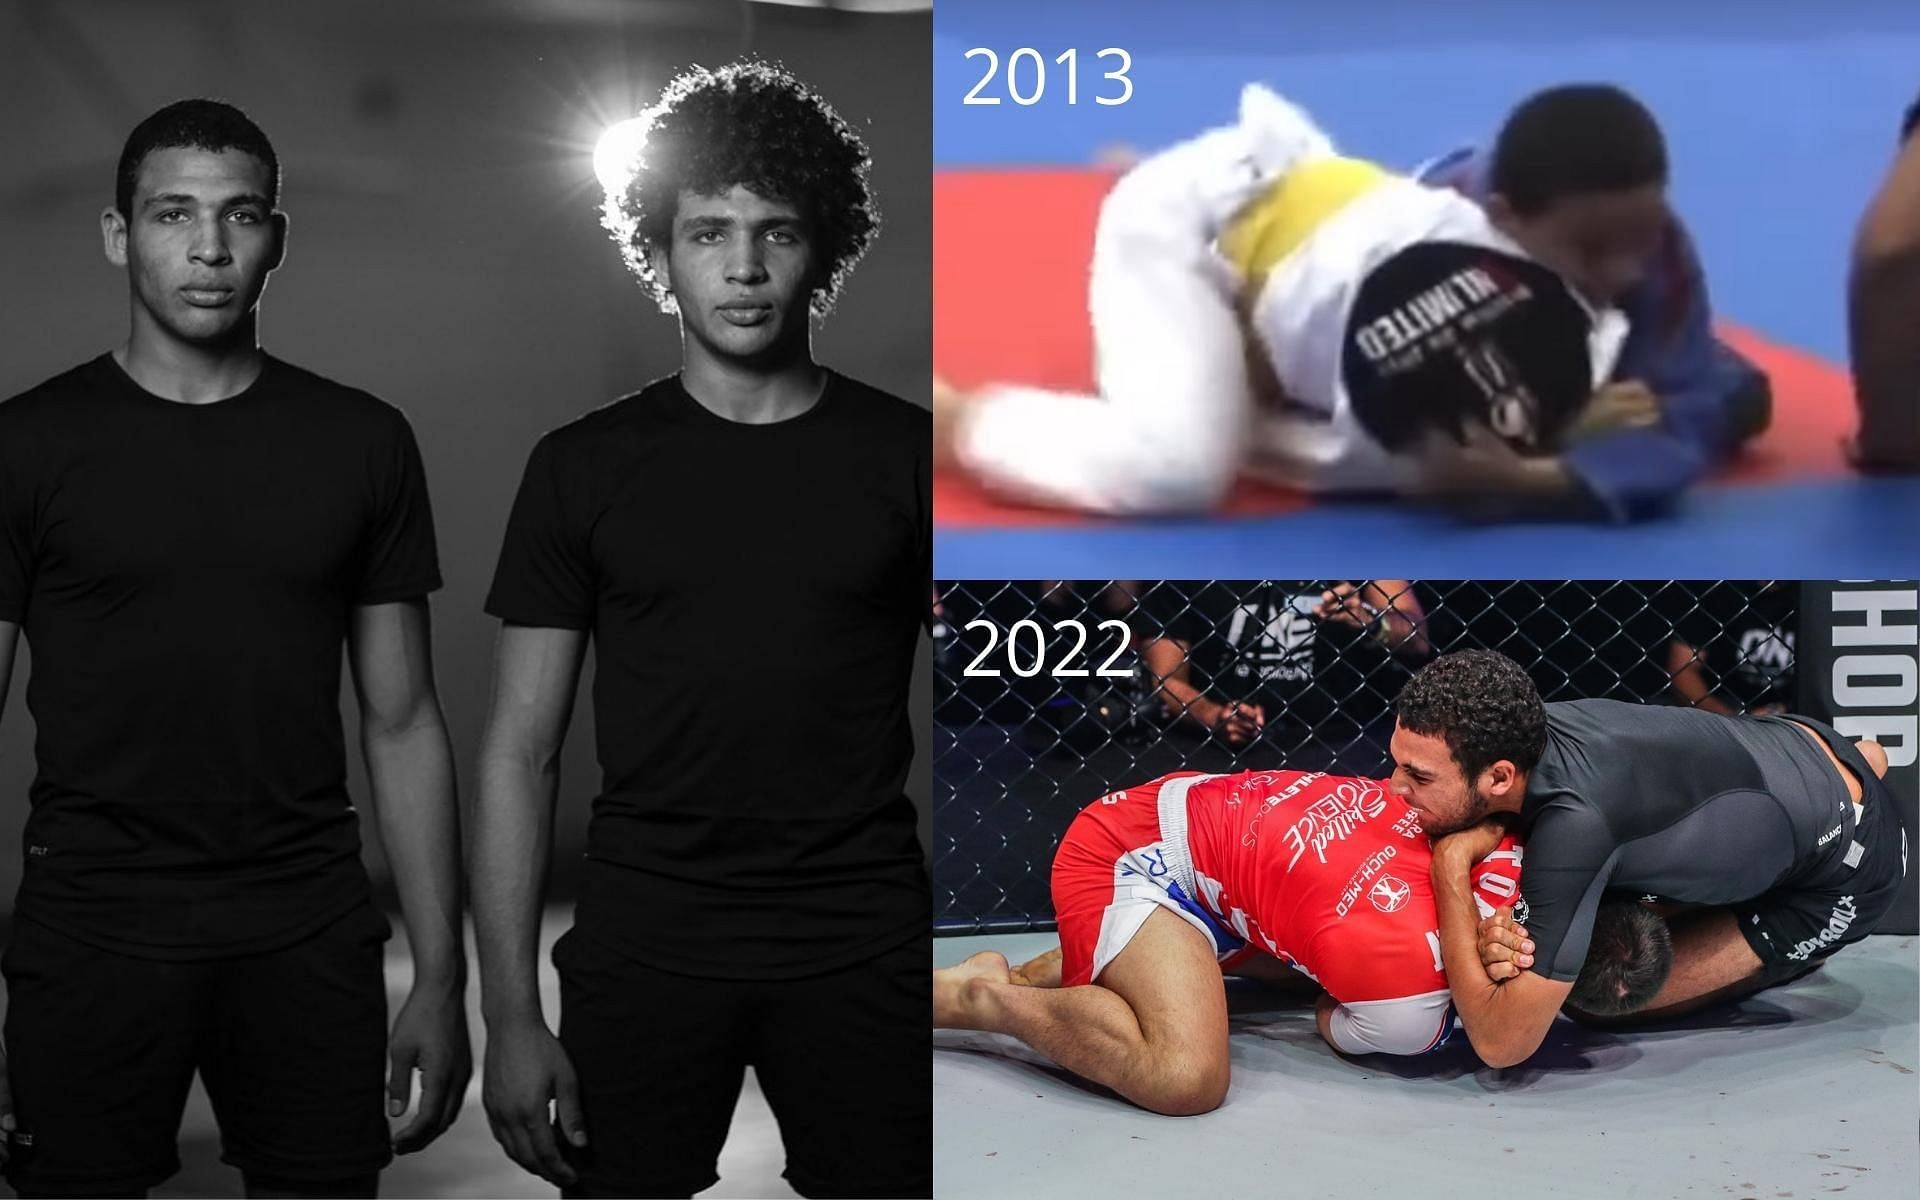 Tye and Kade Ruotolo (left) consider the D&#039;Arce choke (right) as their favorite submission move since they were kids. (Images courtesy of ONE Championship)